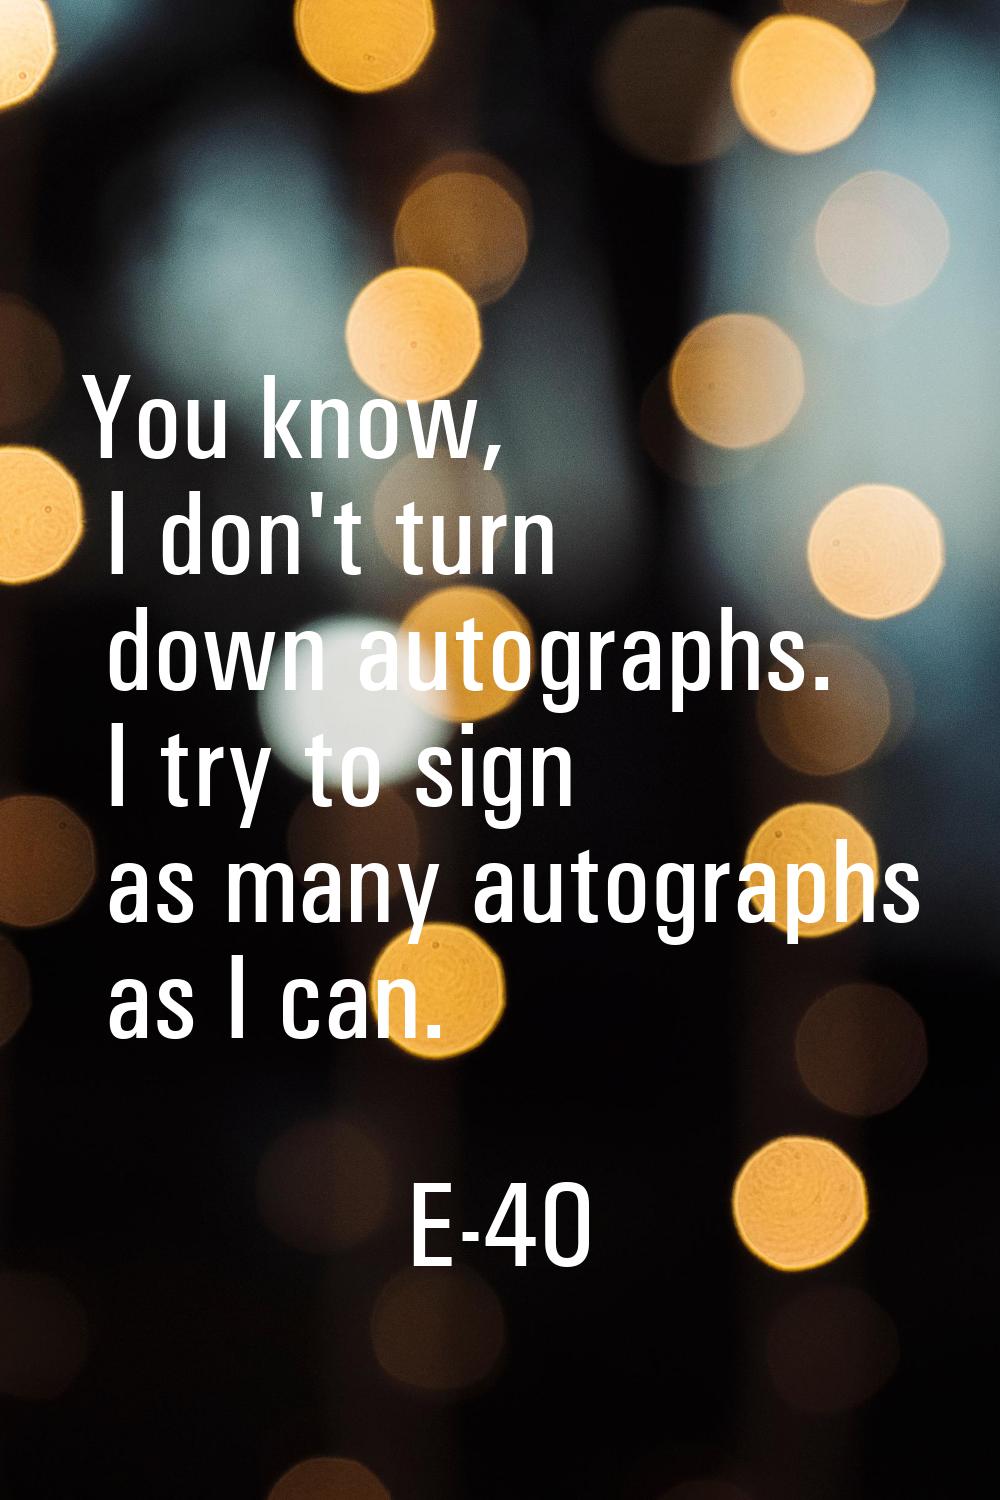 You know, I don't turn down autographs. I try to sign as many autographs as I can.